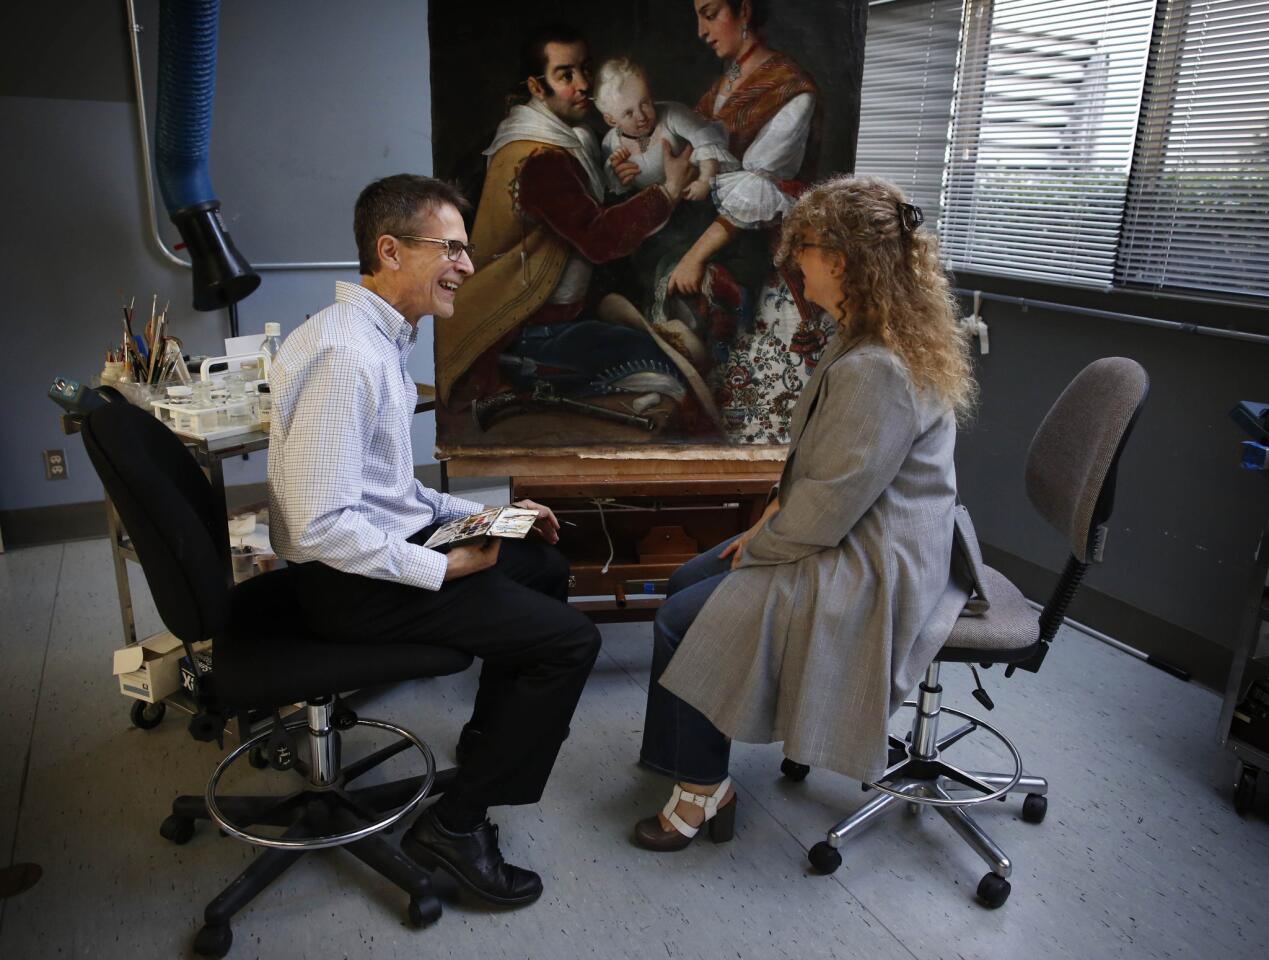 Joseph Fronek, senior paintings conservator and head of paintings conservation, sits with curator Ilona Katzew at LACMA, where one of the 16 scroll casta paintings by 18th century Mexican artist Miguel Cabrera was restored.